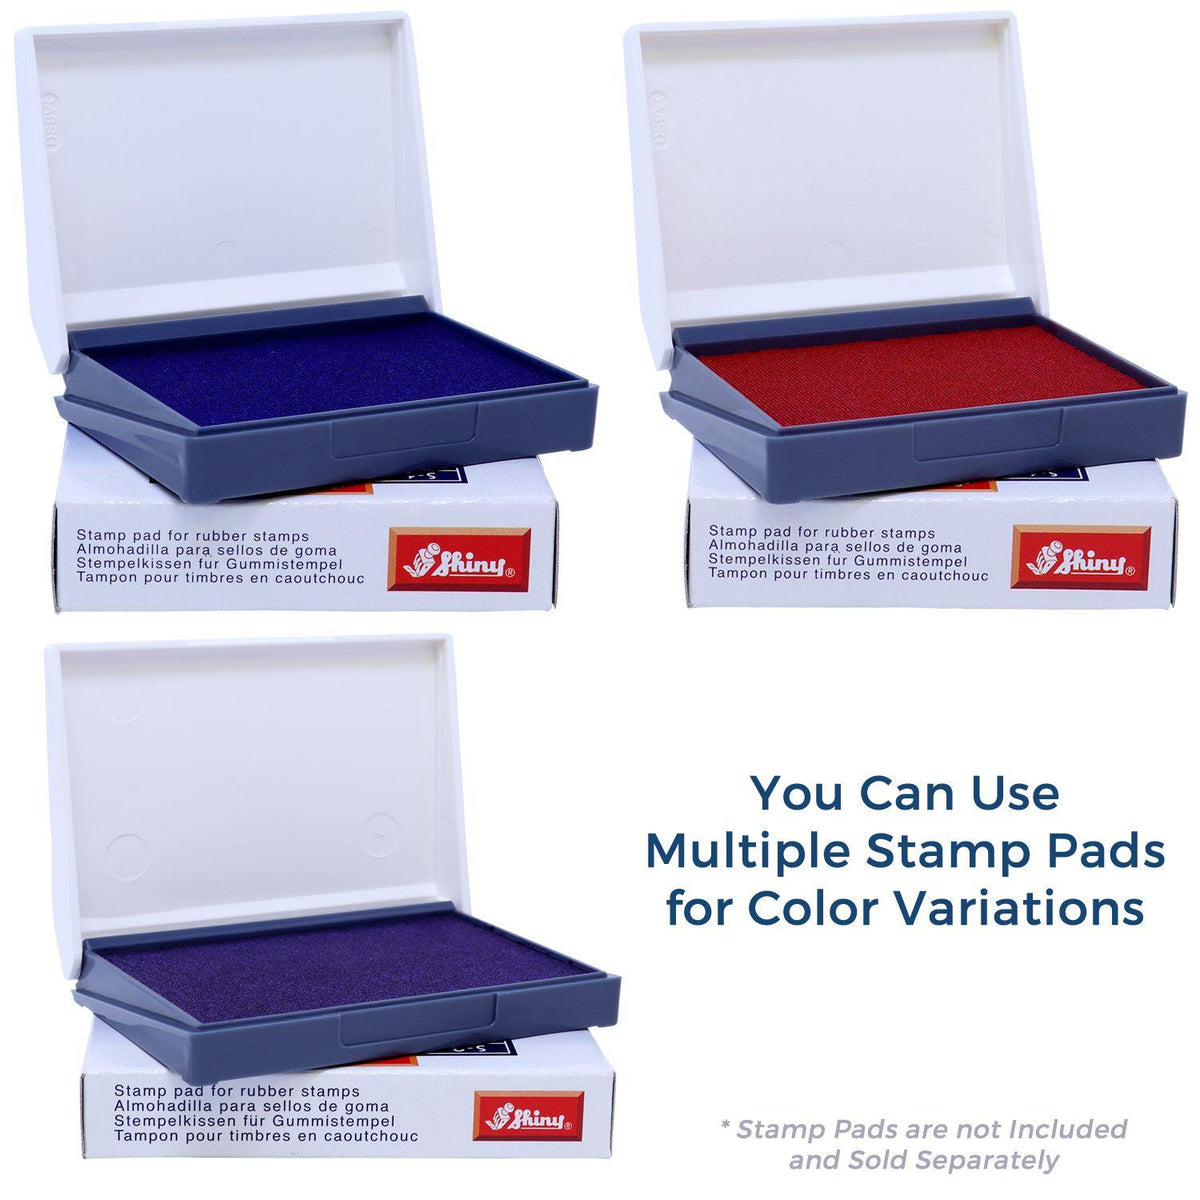 Stamp Pads for Cash Rubber Stamp Available